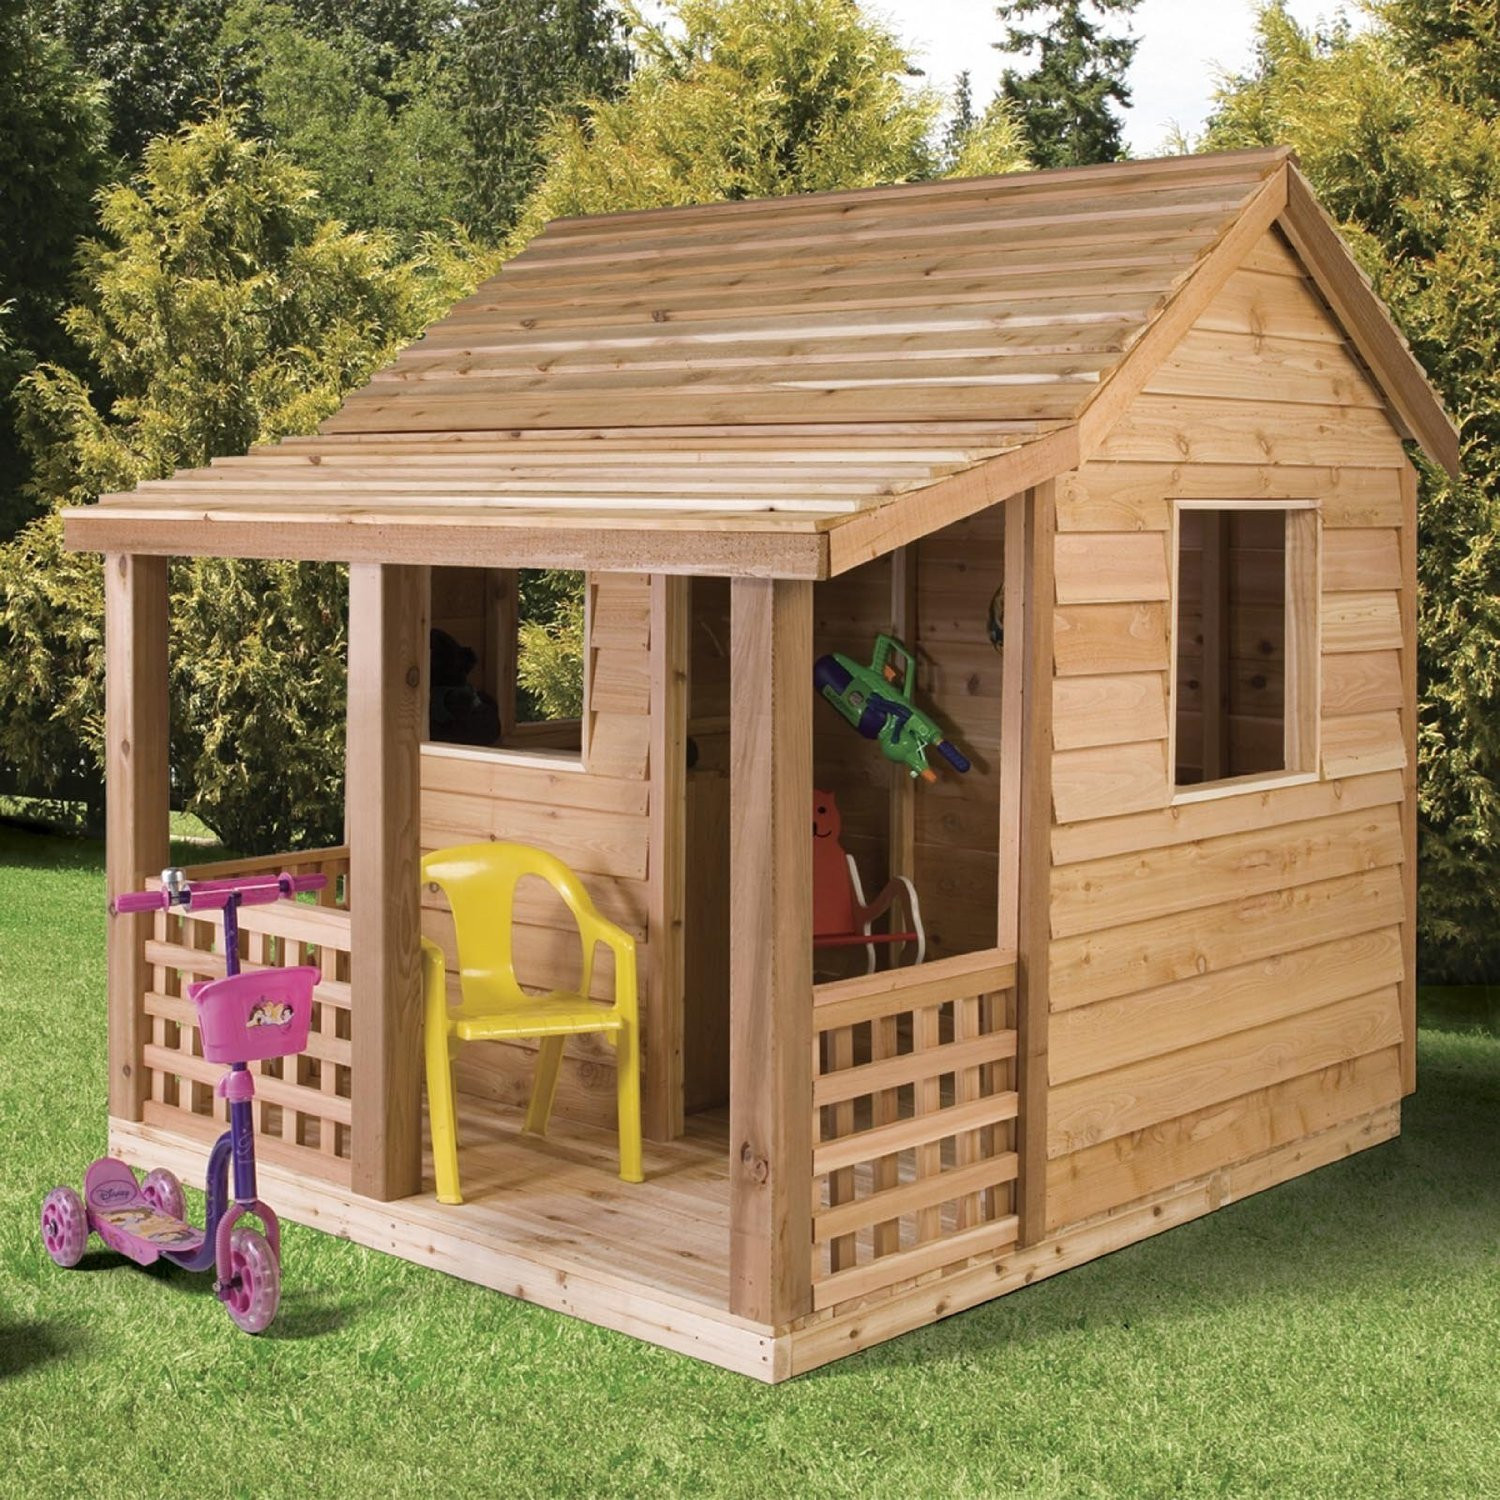 Outdoor Playhouse For Kids
 Adorable Outdoor Wood Cottage Playhouses for Kids